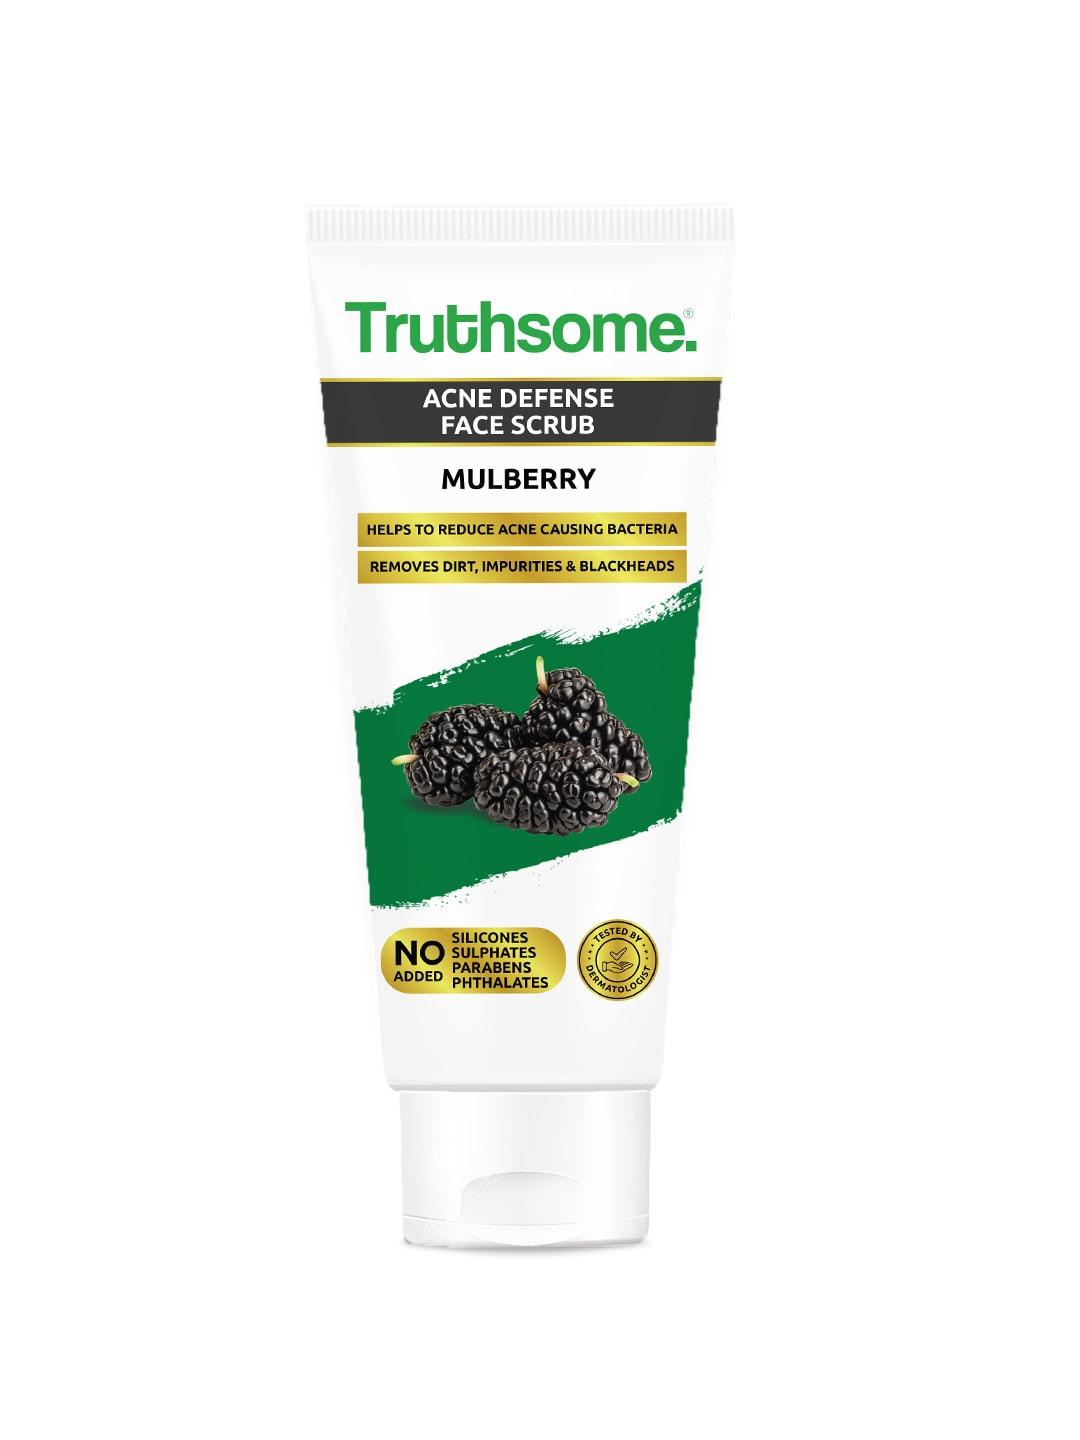 Truthsome. Acne Defense Face Scrub with Mulberry for Acne Prone Skin - 100 ml